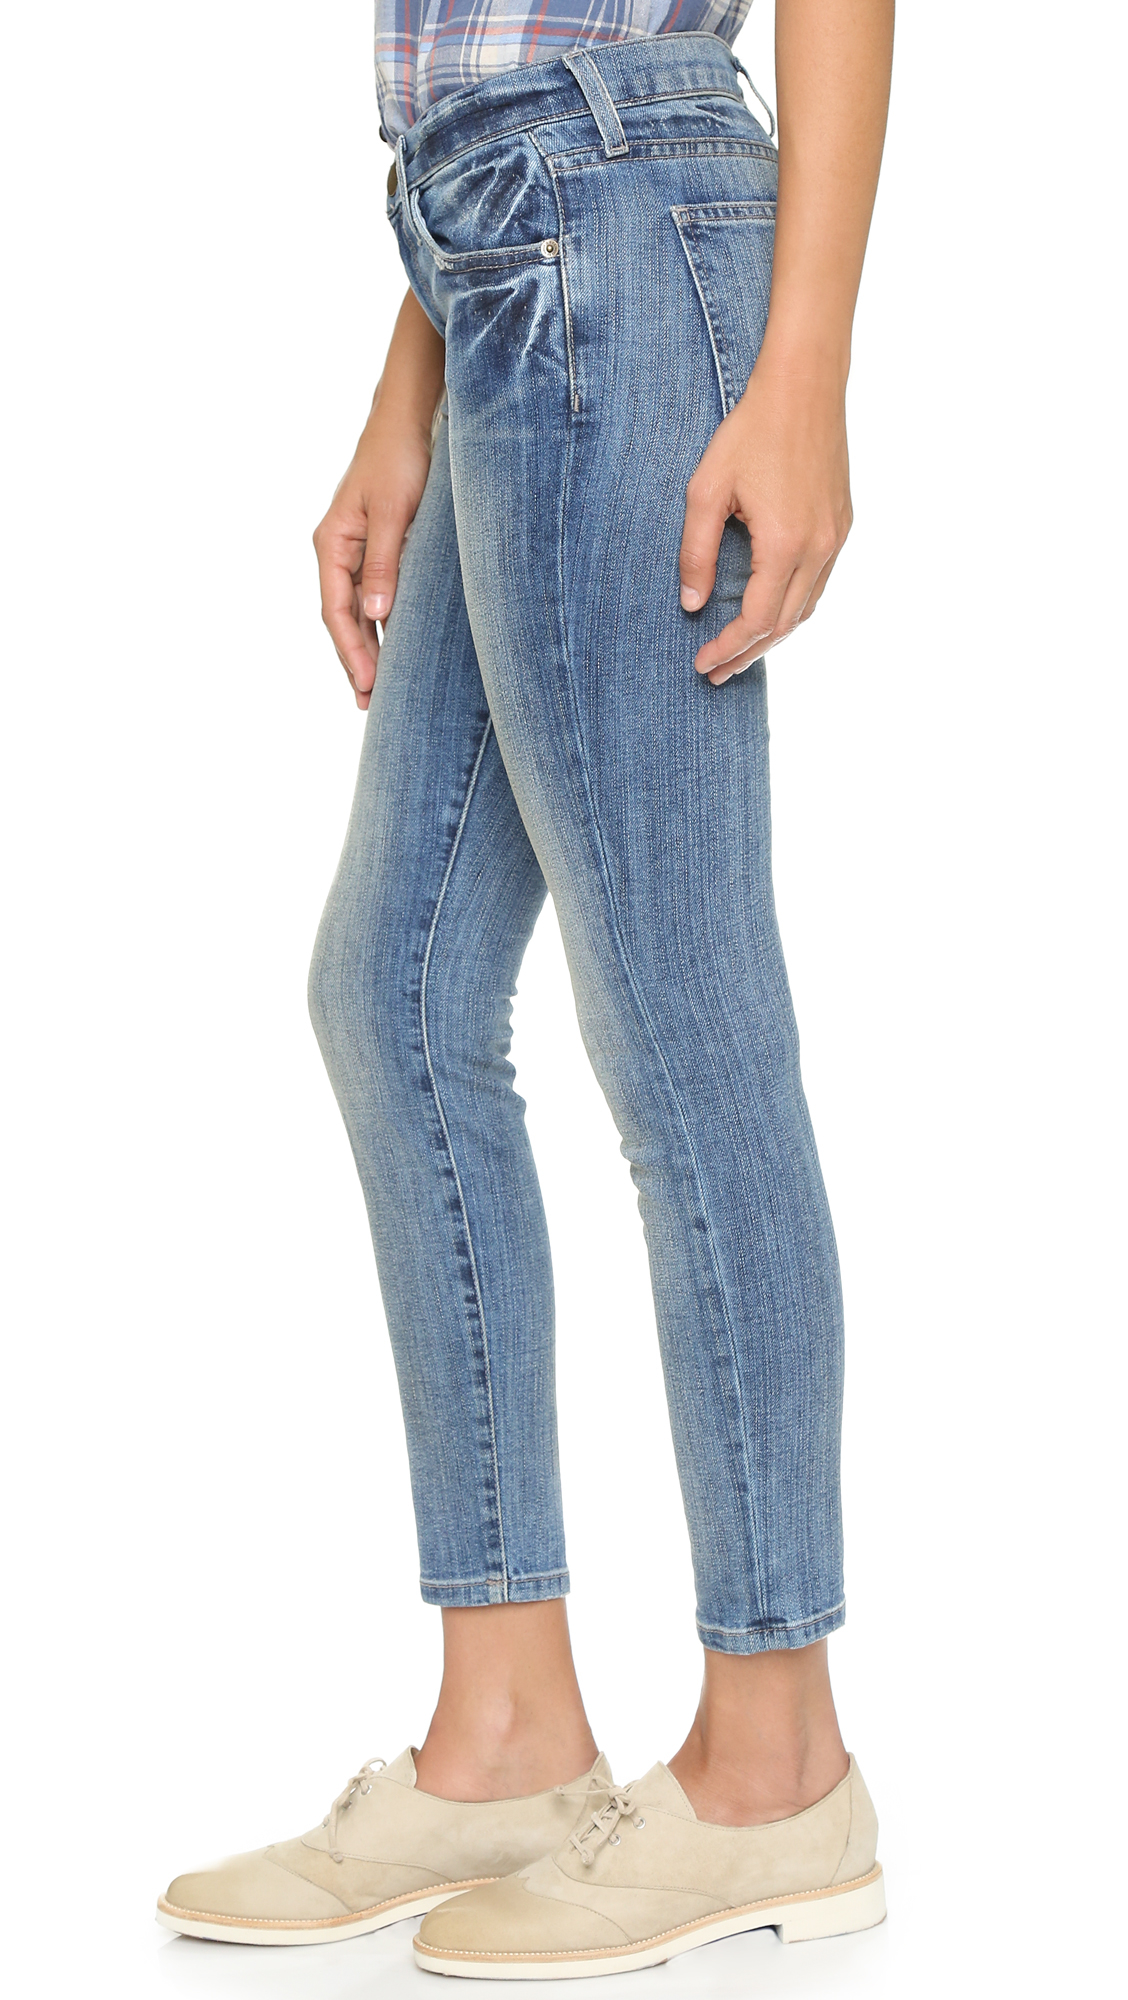 Lyst - Current/Elliott The Stiletto Jeans in Blue